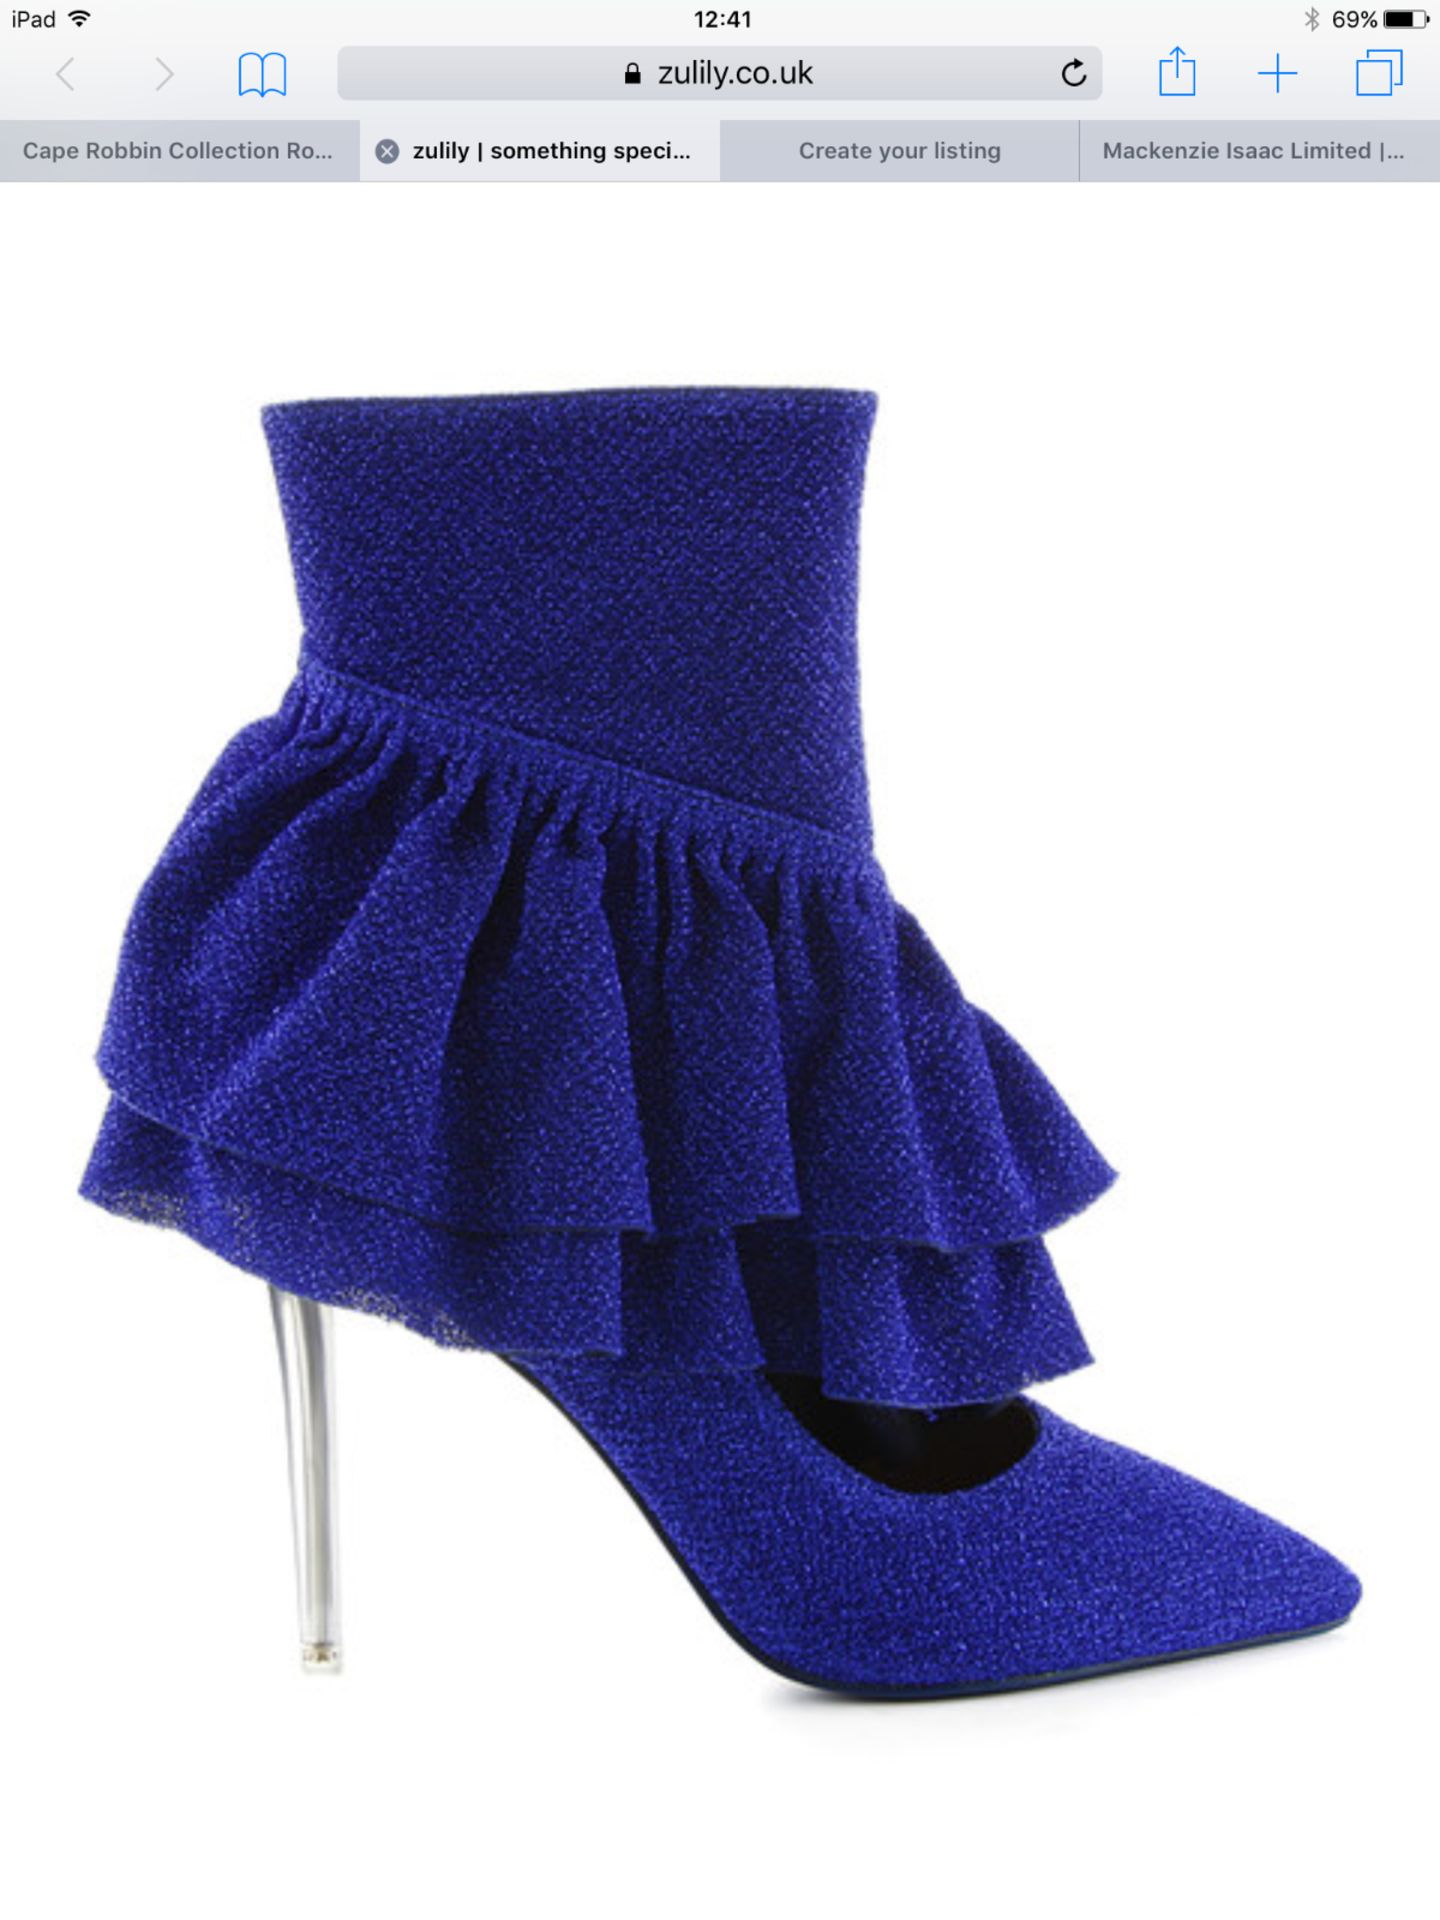 Cape Robbin Collection Royal Blue Beatrix Ruffle Boot, Size Eur 39, RRP £59.99 (New with box) [ - Image 3 of 7